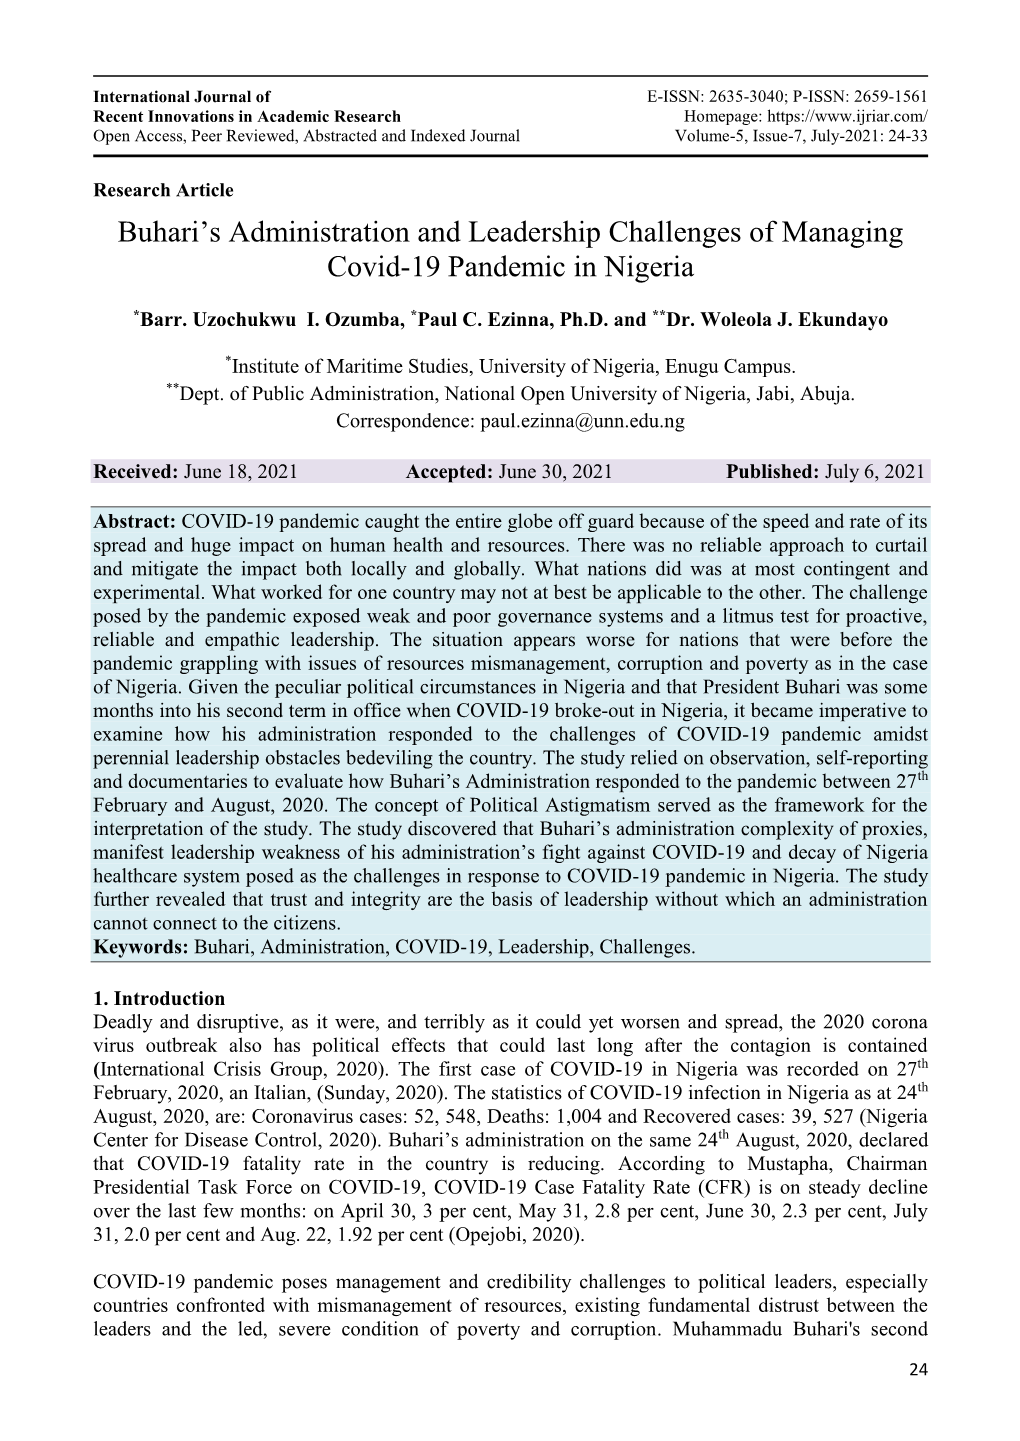 Buhari's Administration and Leadership Challenges of Managing Covid-19 Pandemic in Nigeria